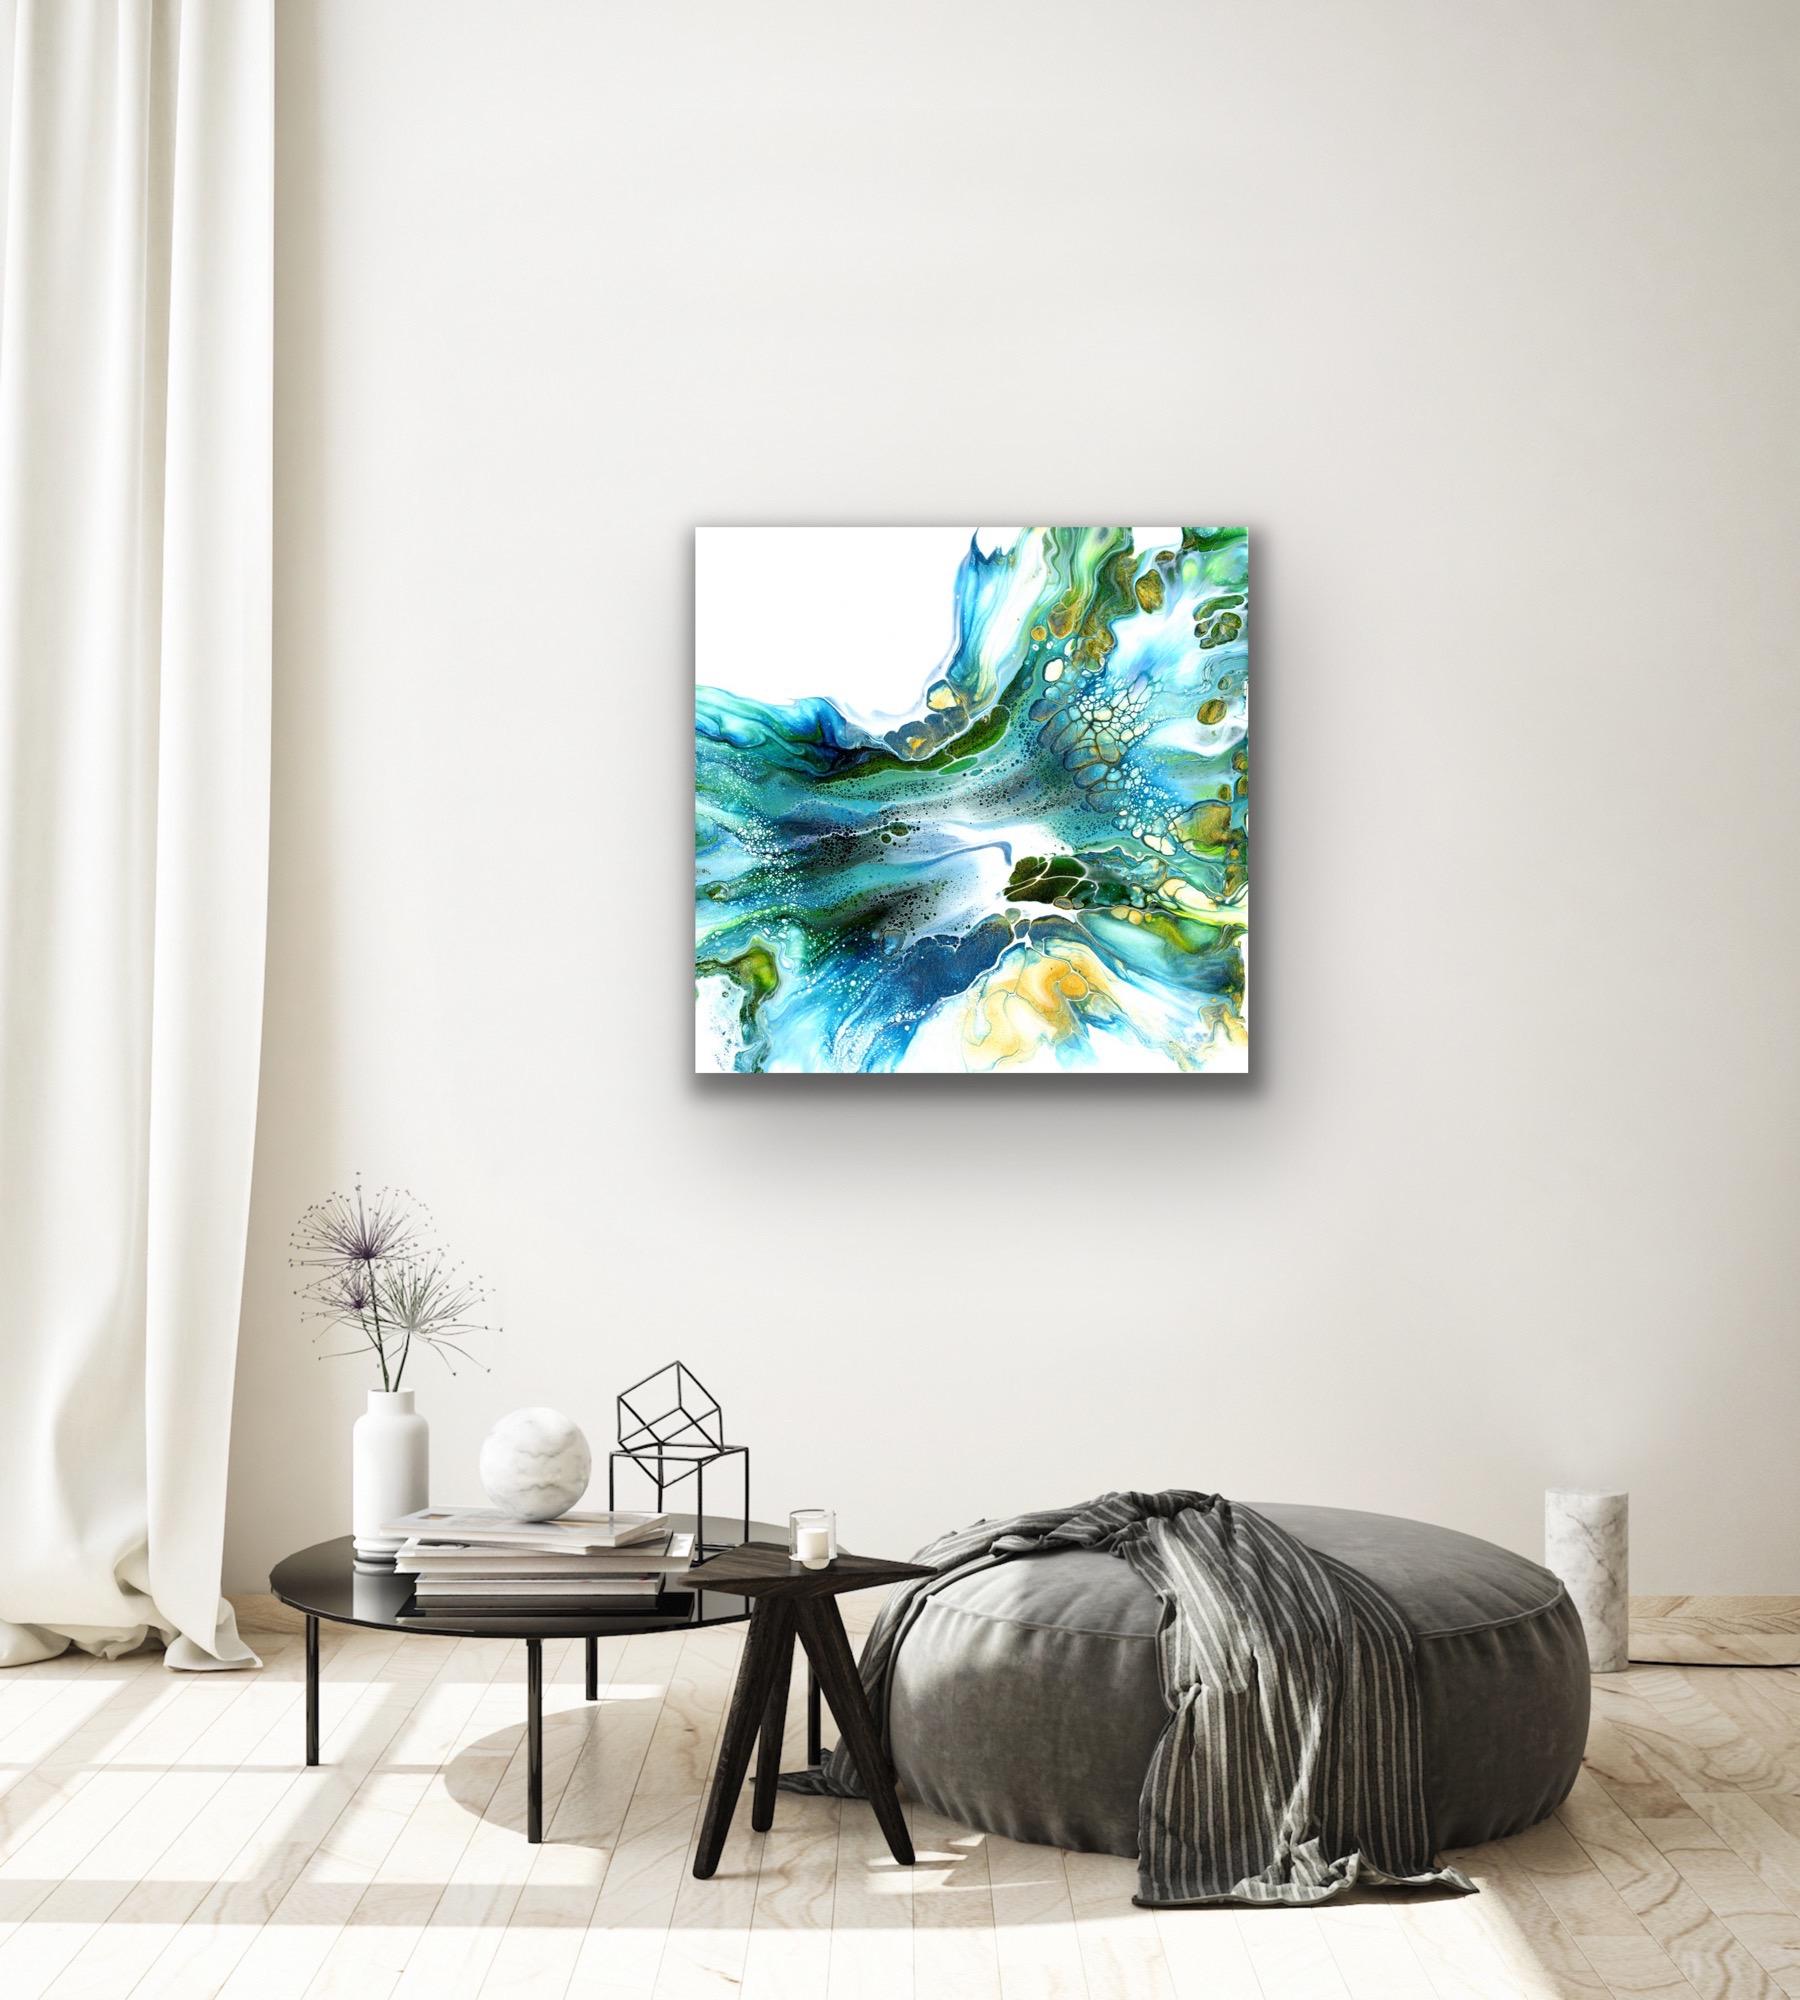 Contemporary Modern Abstract, Giclee Print on Metal, Limited Edition, by Cessy  3